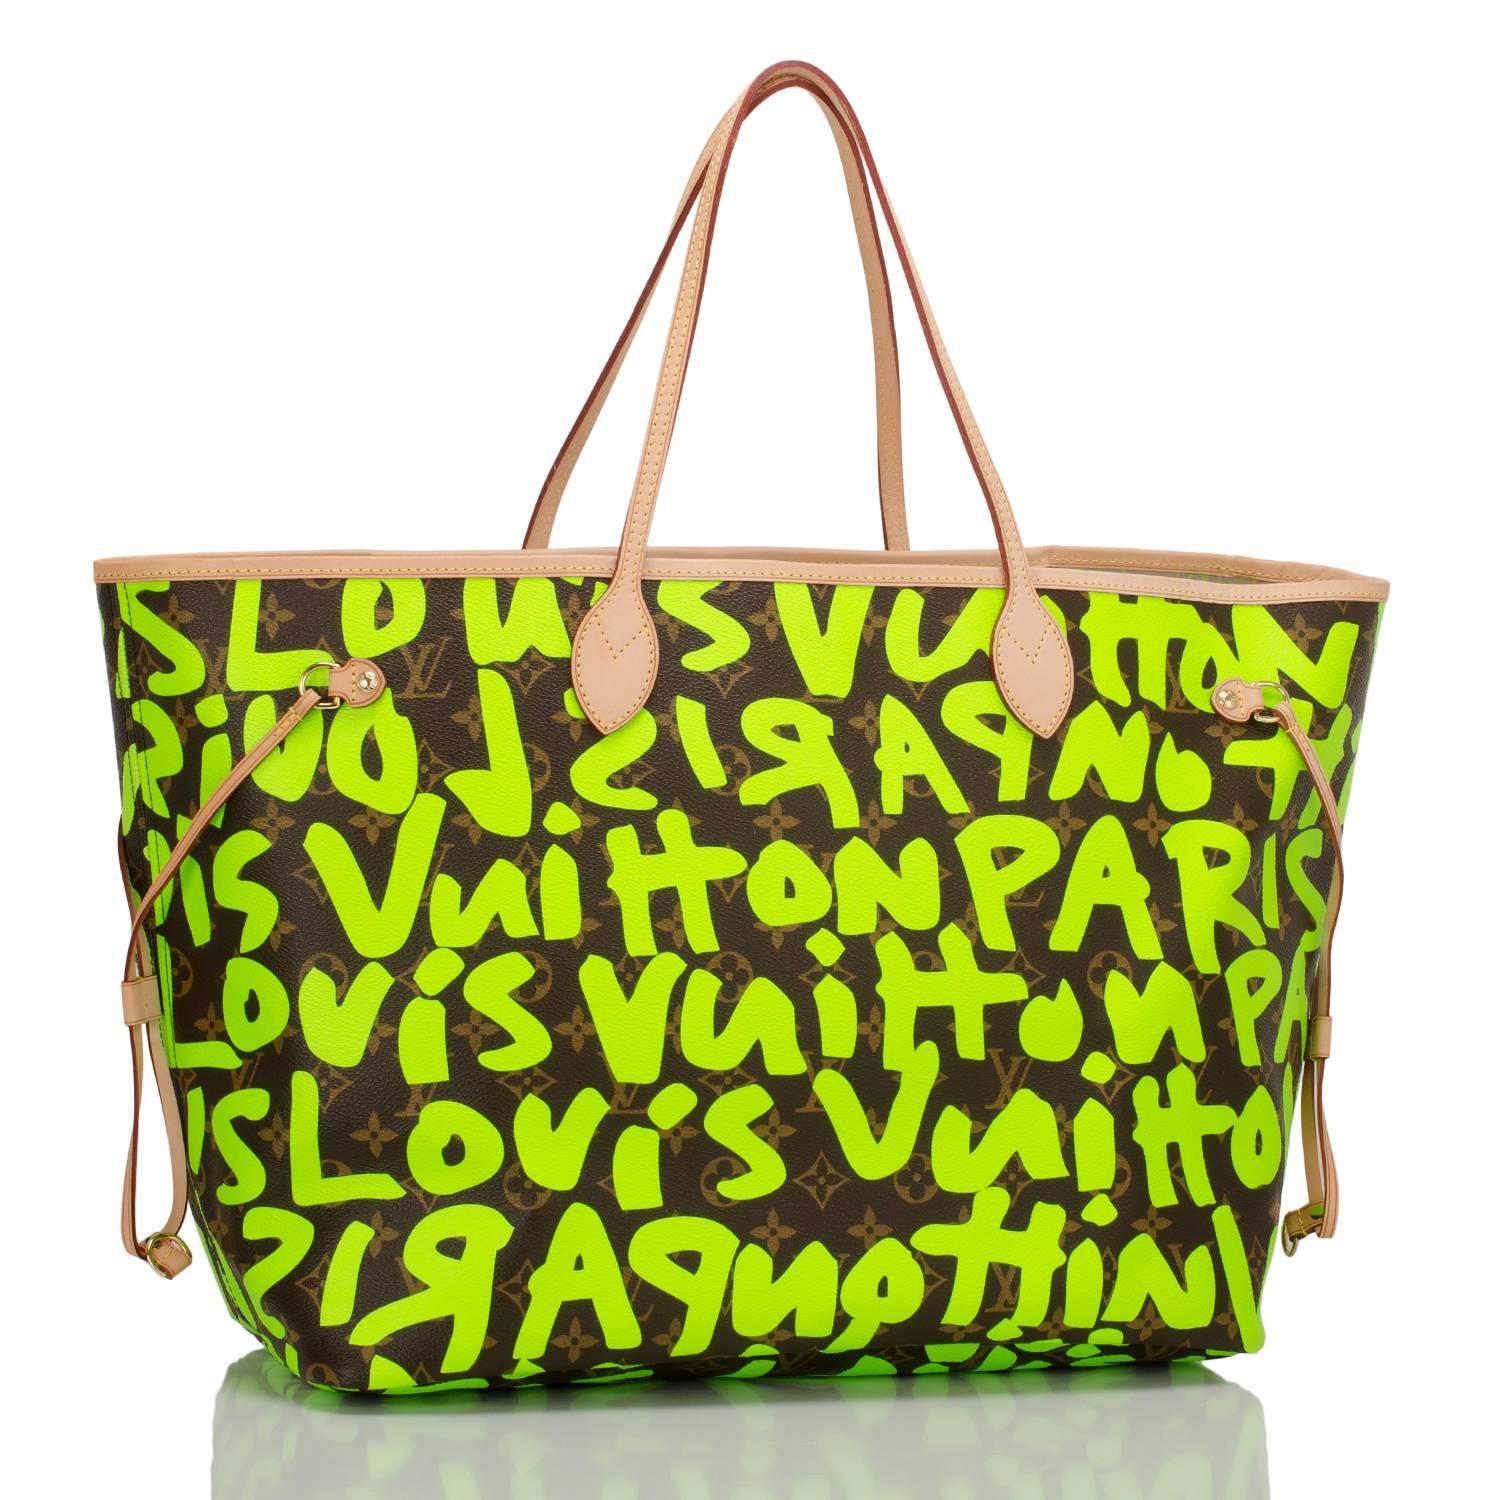 Louis Vuitton Green Monogram Graffiti Neverfull GM of coated canvas with silk screened bright fluorescent green colored graffiti lettering designed in tribute to Stephen Sprouse.

This classic tote features polished brass hardware, vachetta